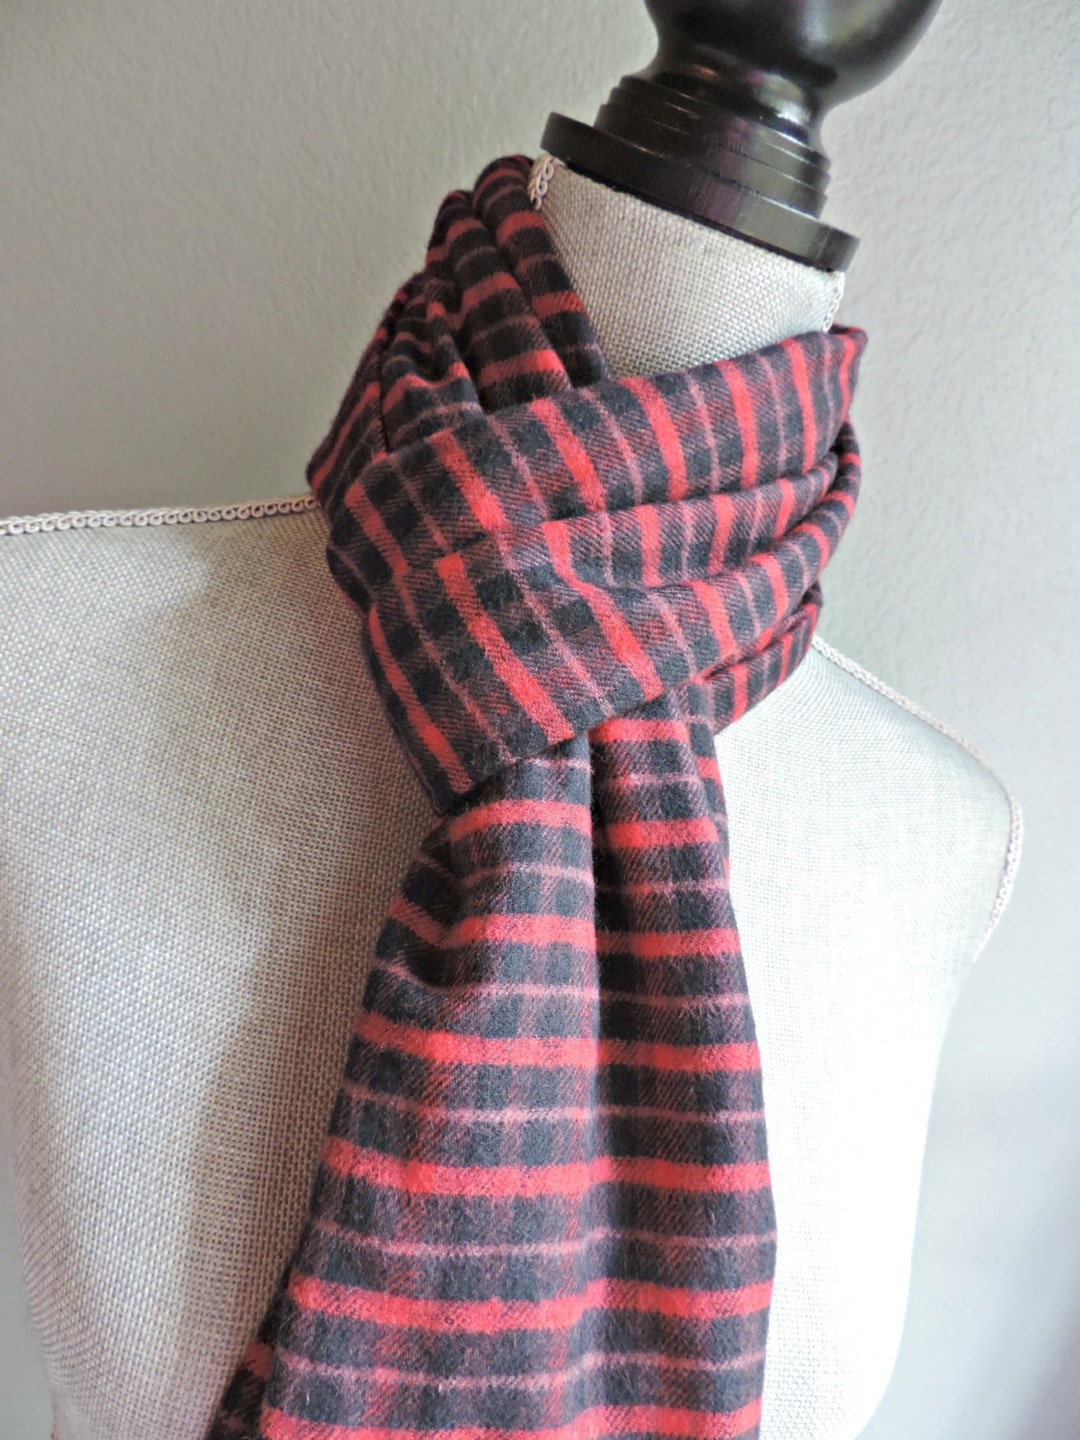 Red & Black Plaid Flannel Infinity Scarf - Etsy